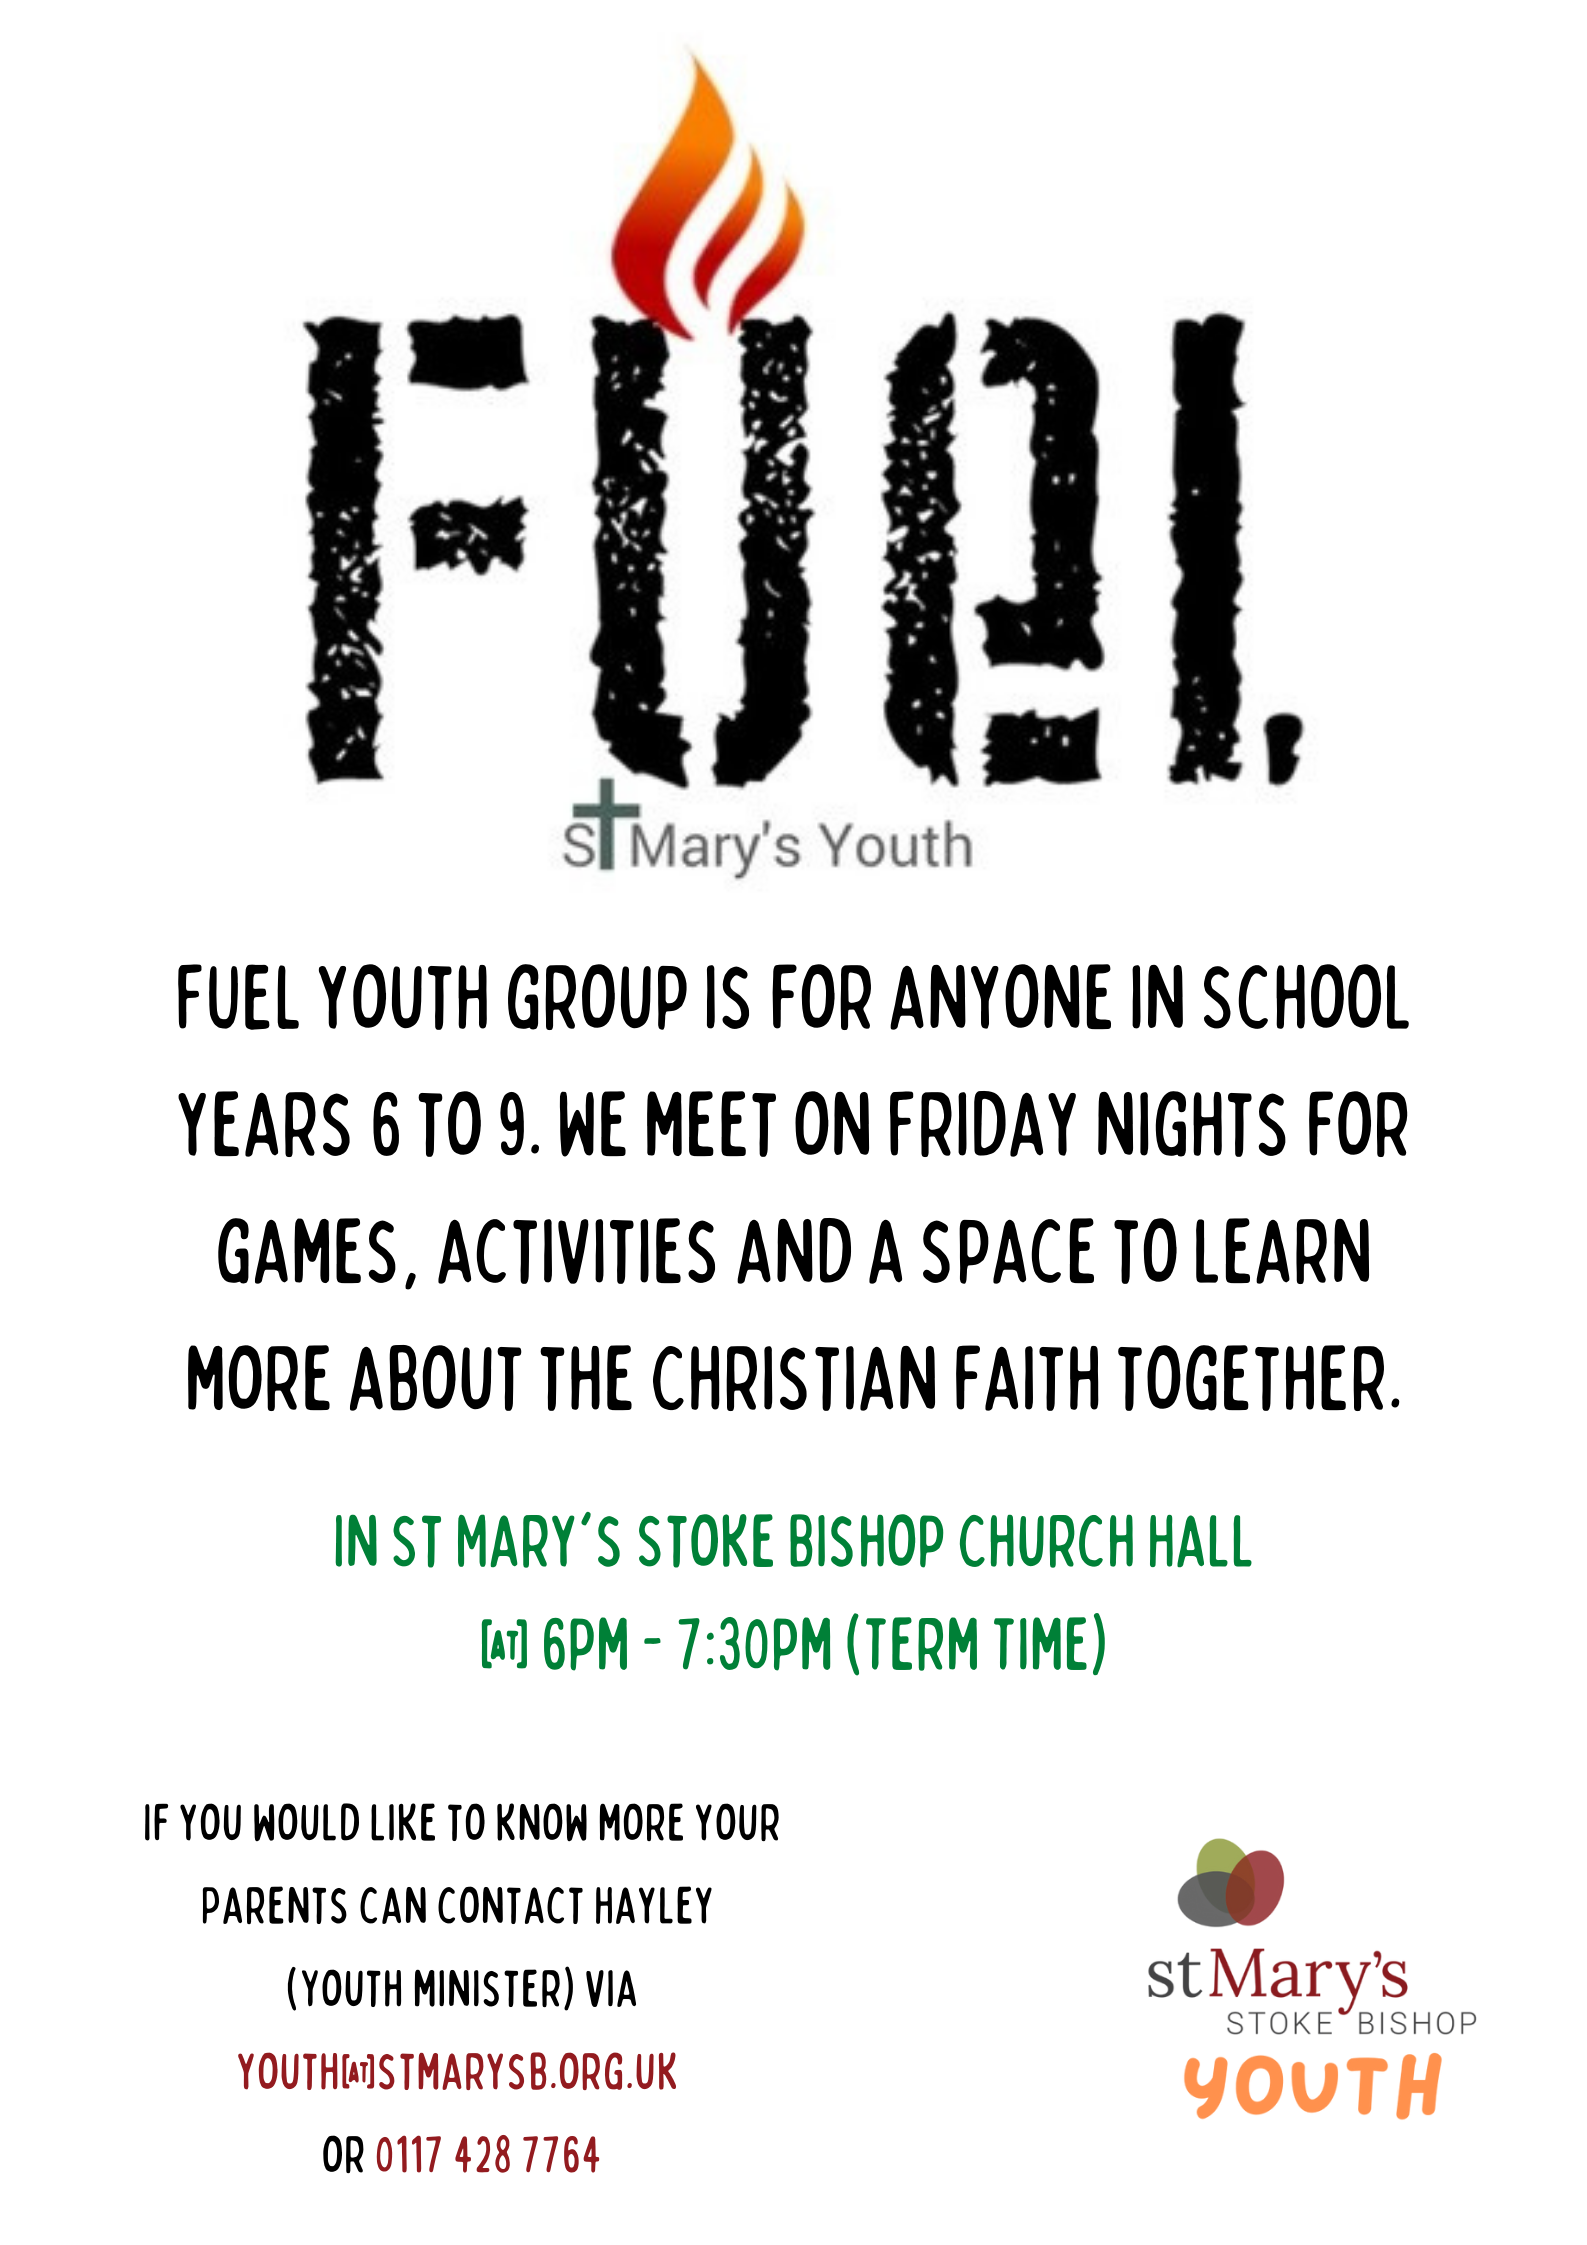 FUEL youth group is for people